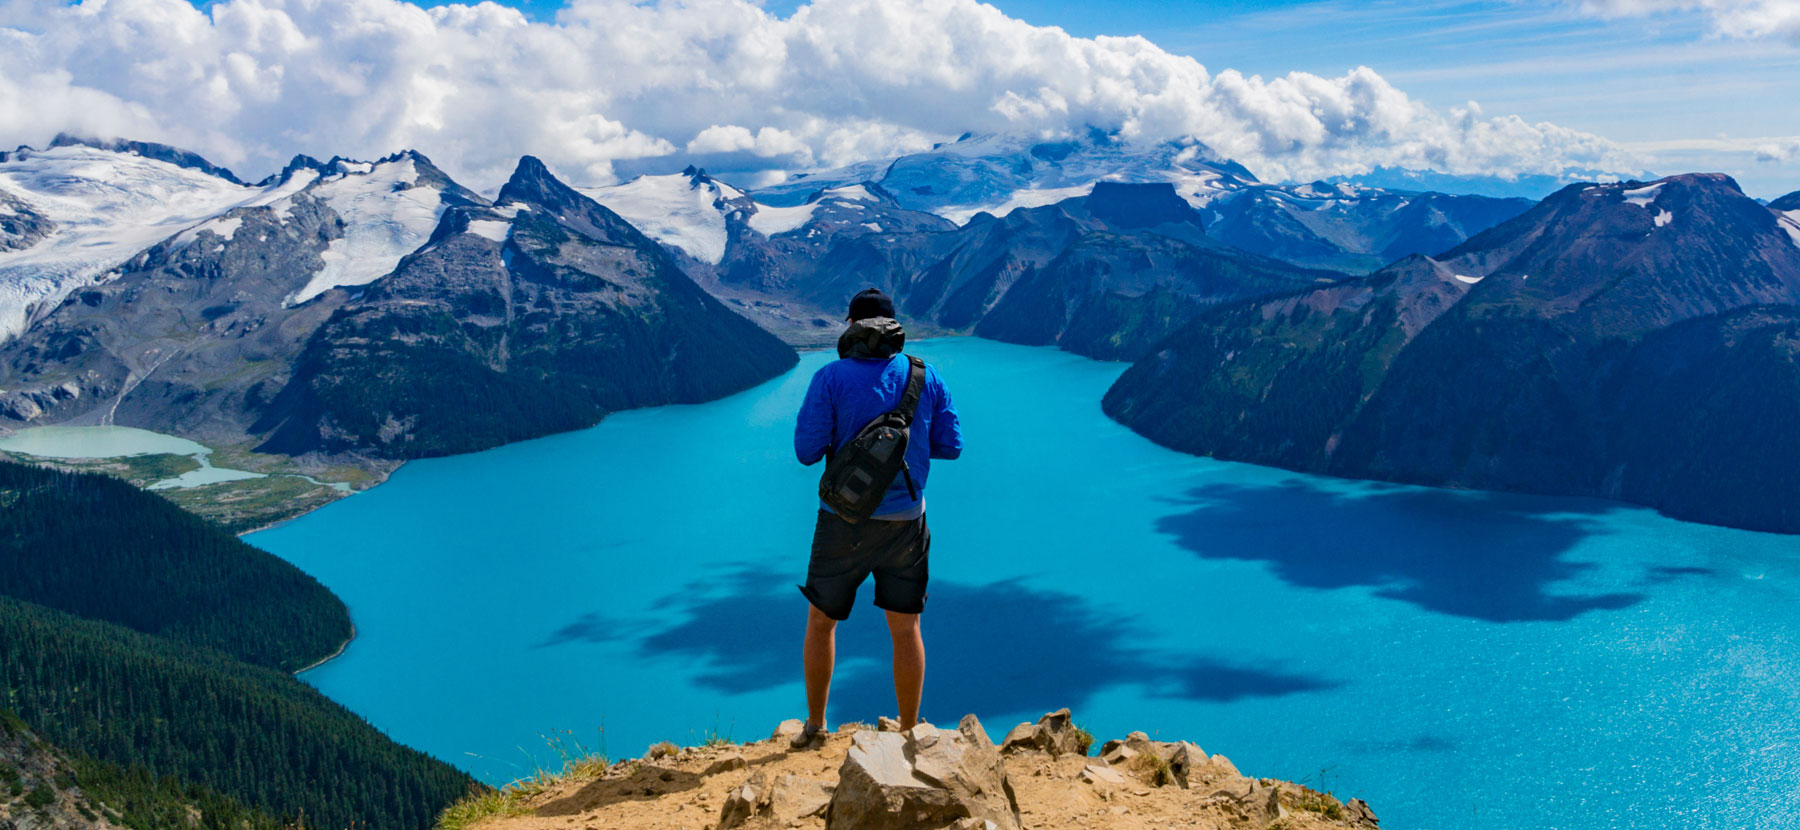 A man wearing a backpack stands on a mountaintop overlooking a panorama of water and other mountains.